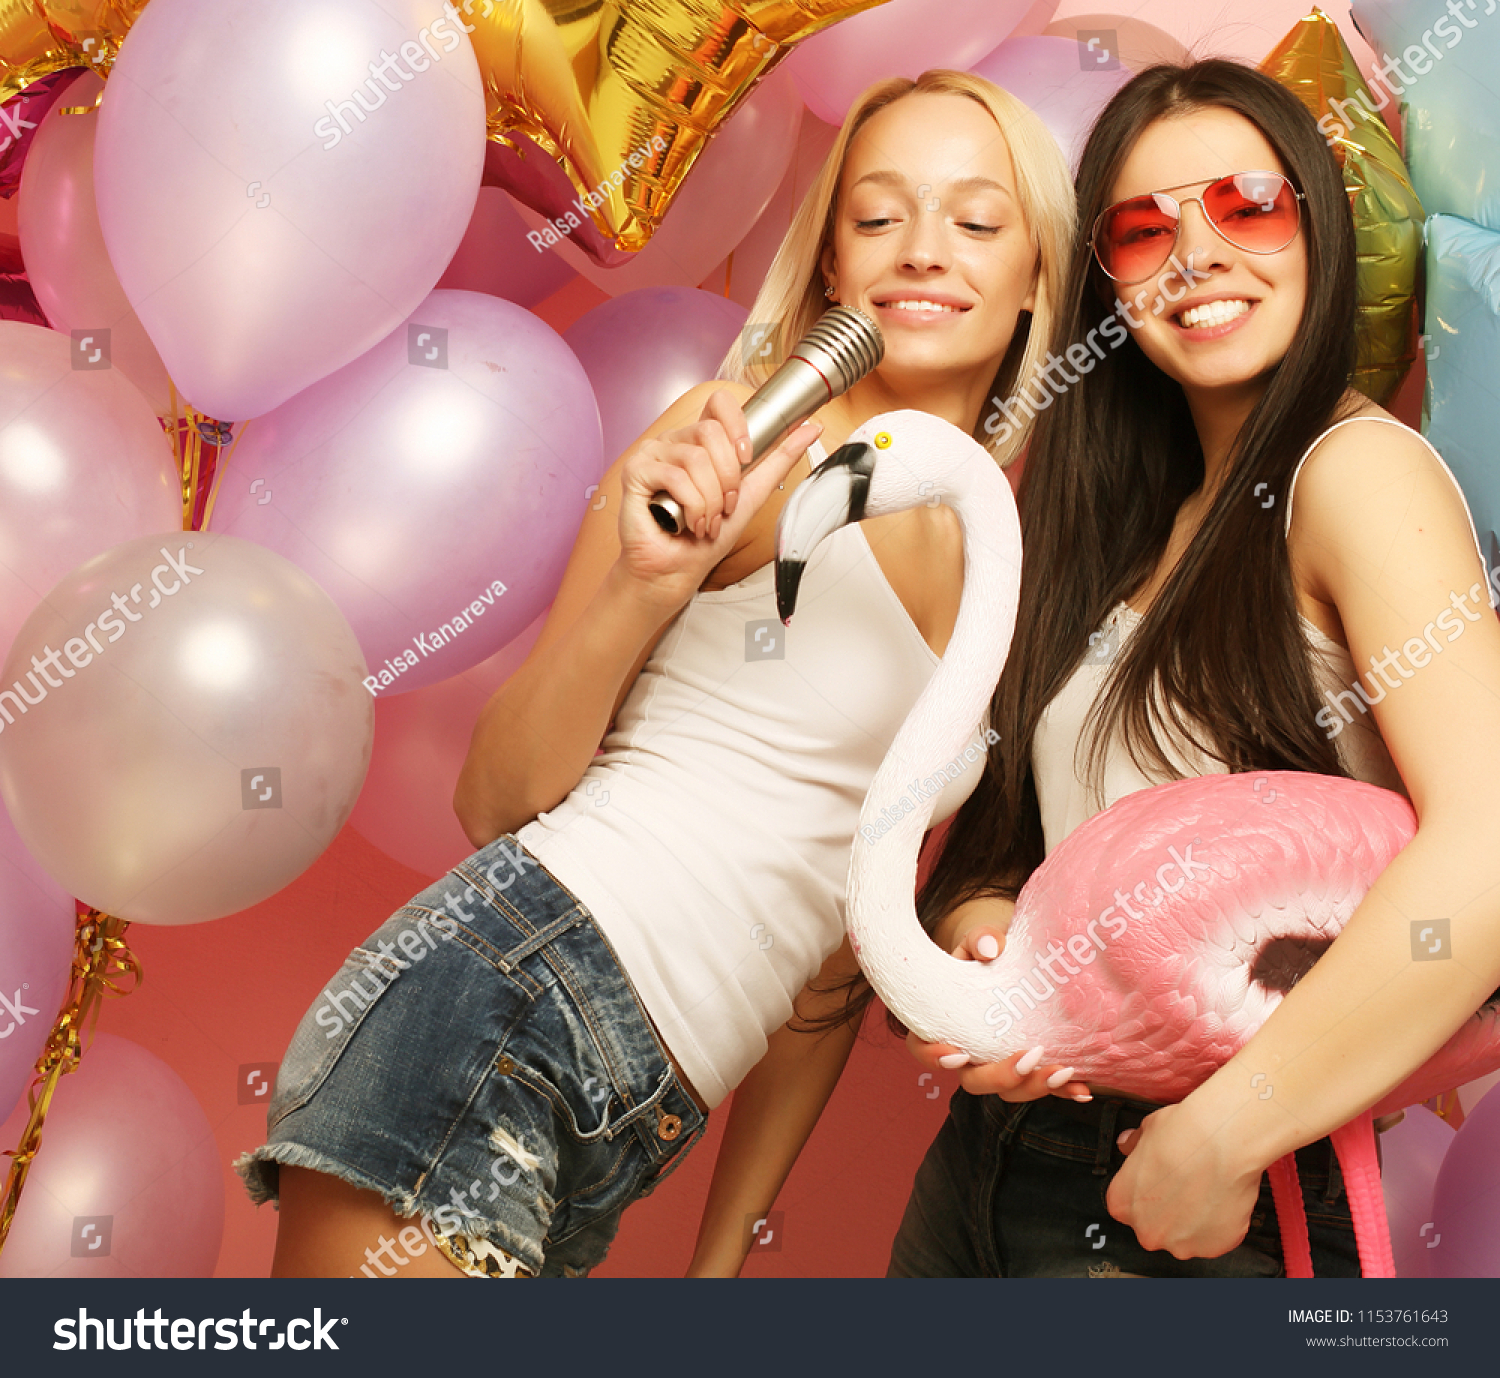 lifestyle, party  and people concept: Happy young girls with microphone and flamingo over вackground of  colorful balloons  #1153761643